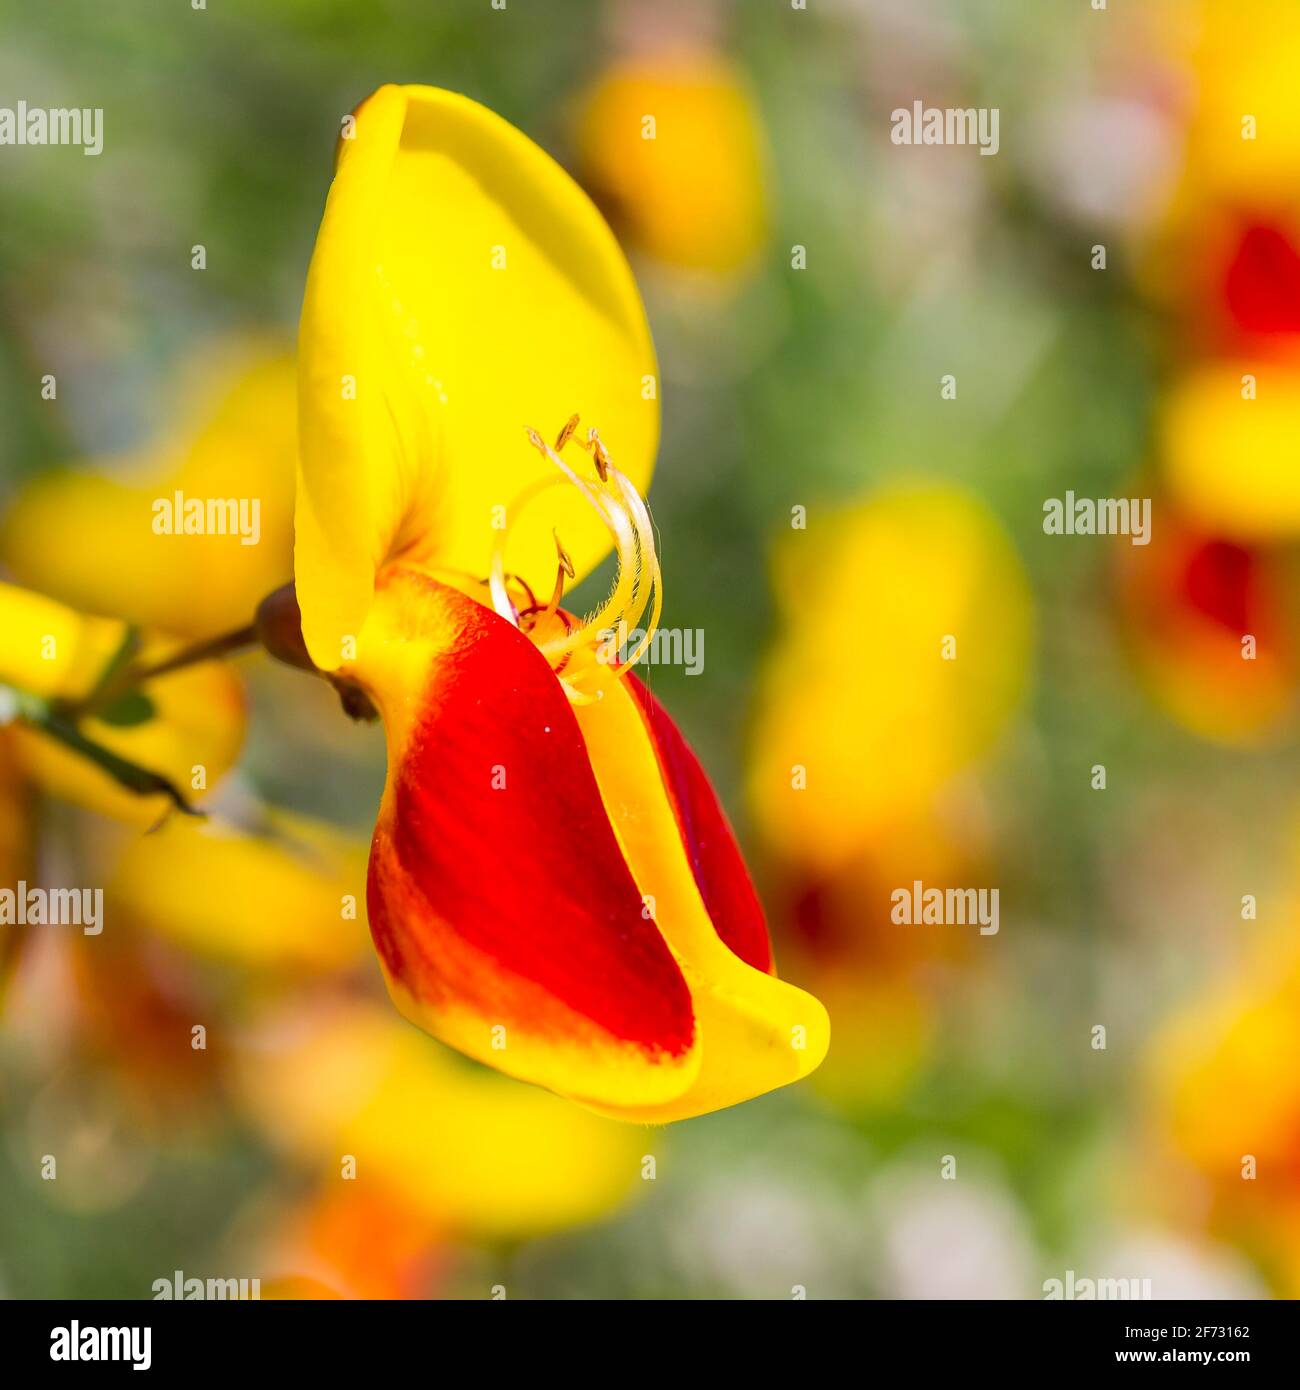 Common broom (Cytisus scoparius), flower in yellow and red, Saxony, Germany Stock Photo